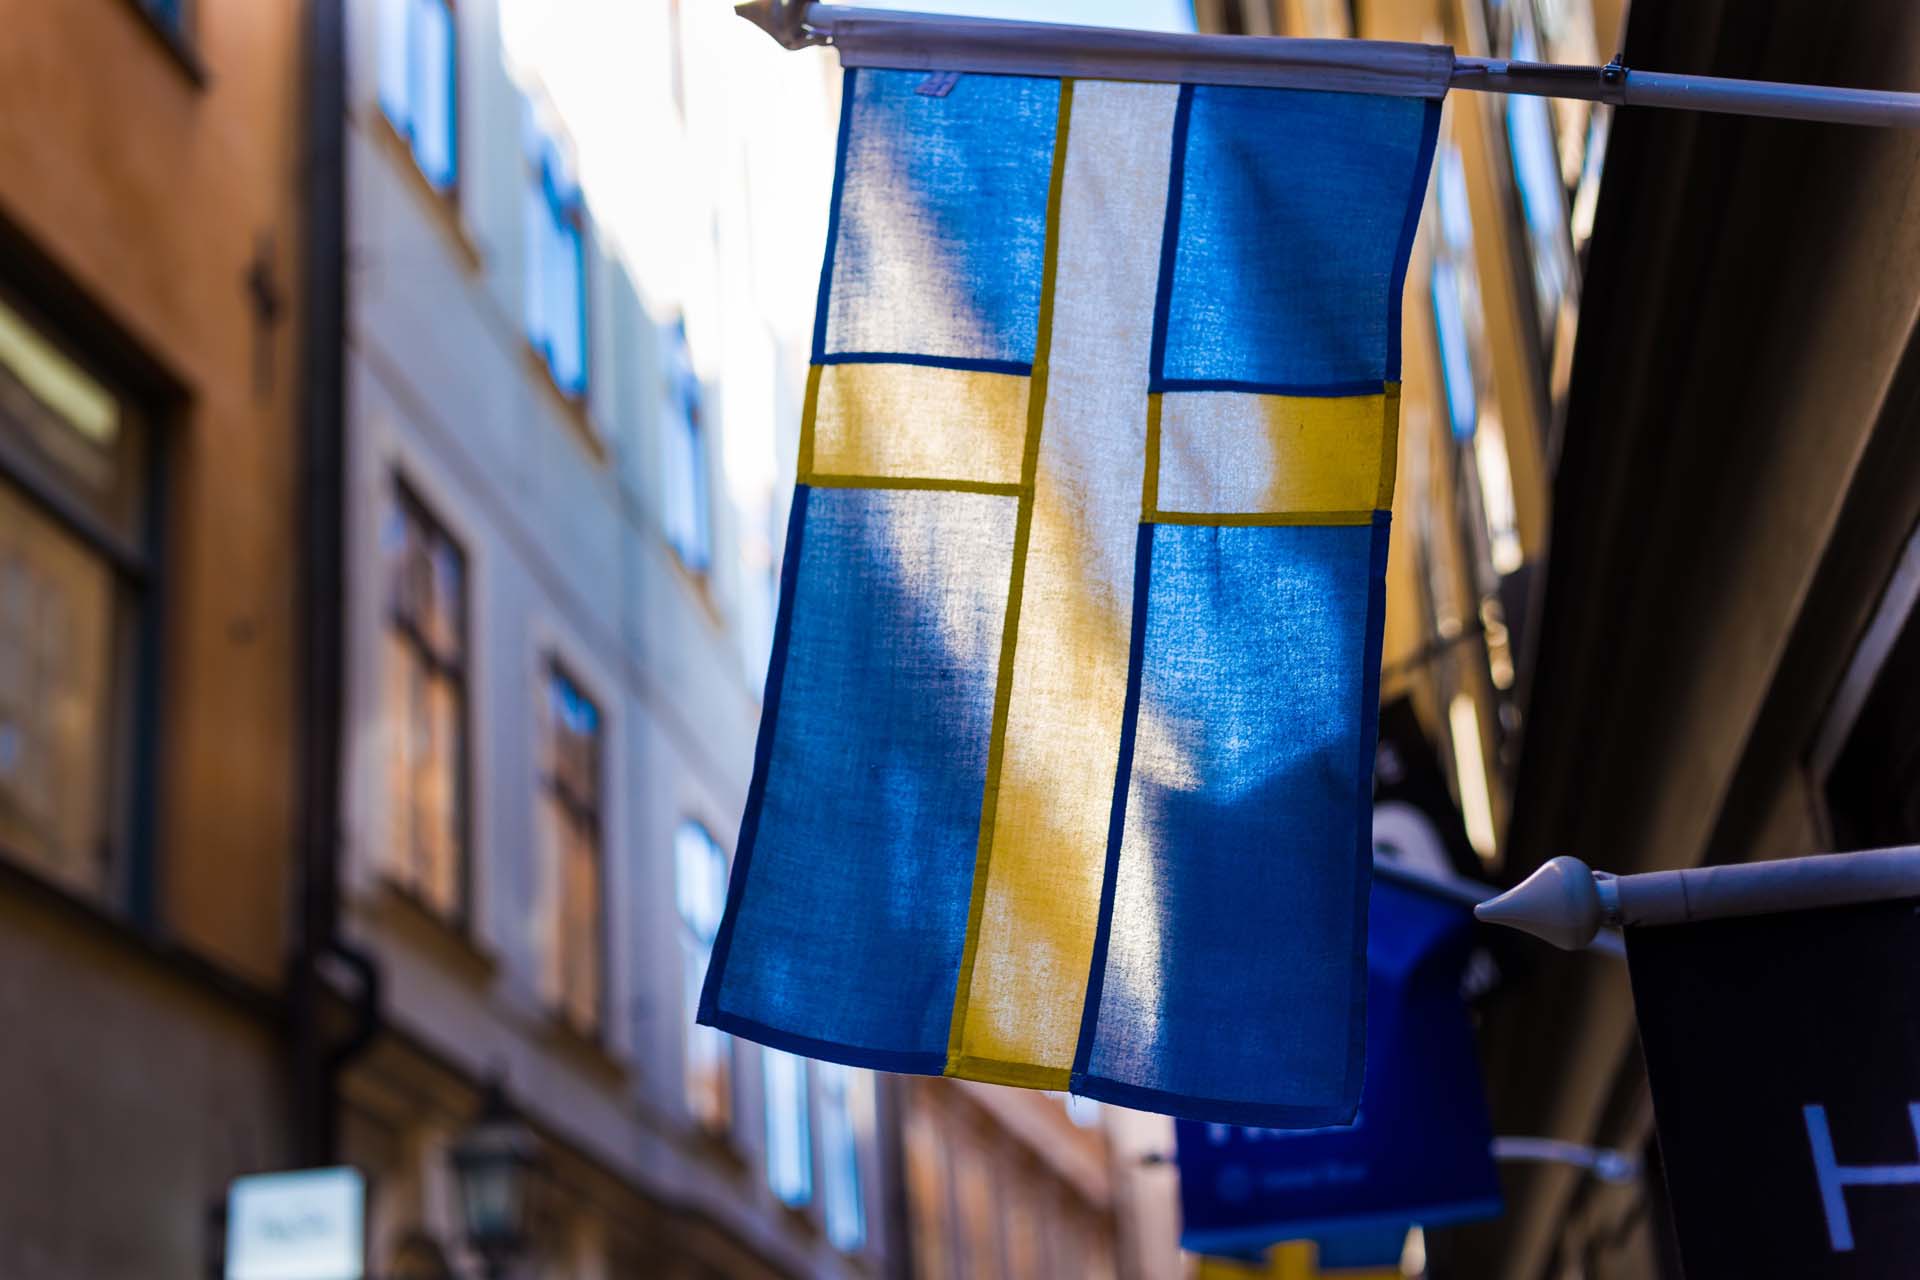 Sweden Grants 6 Months Leave Whenever You Want to Start a Business